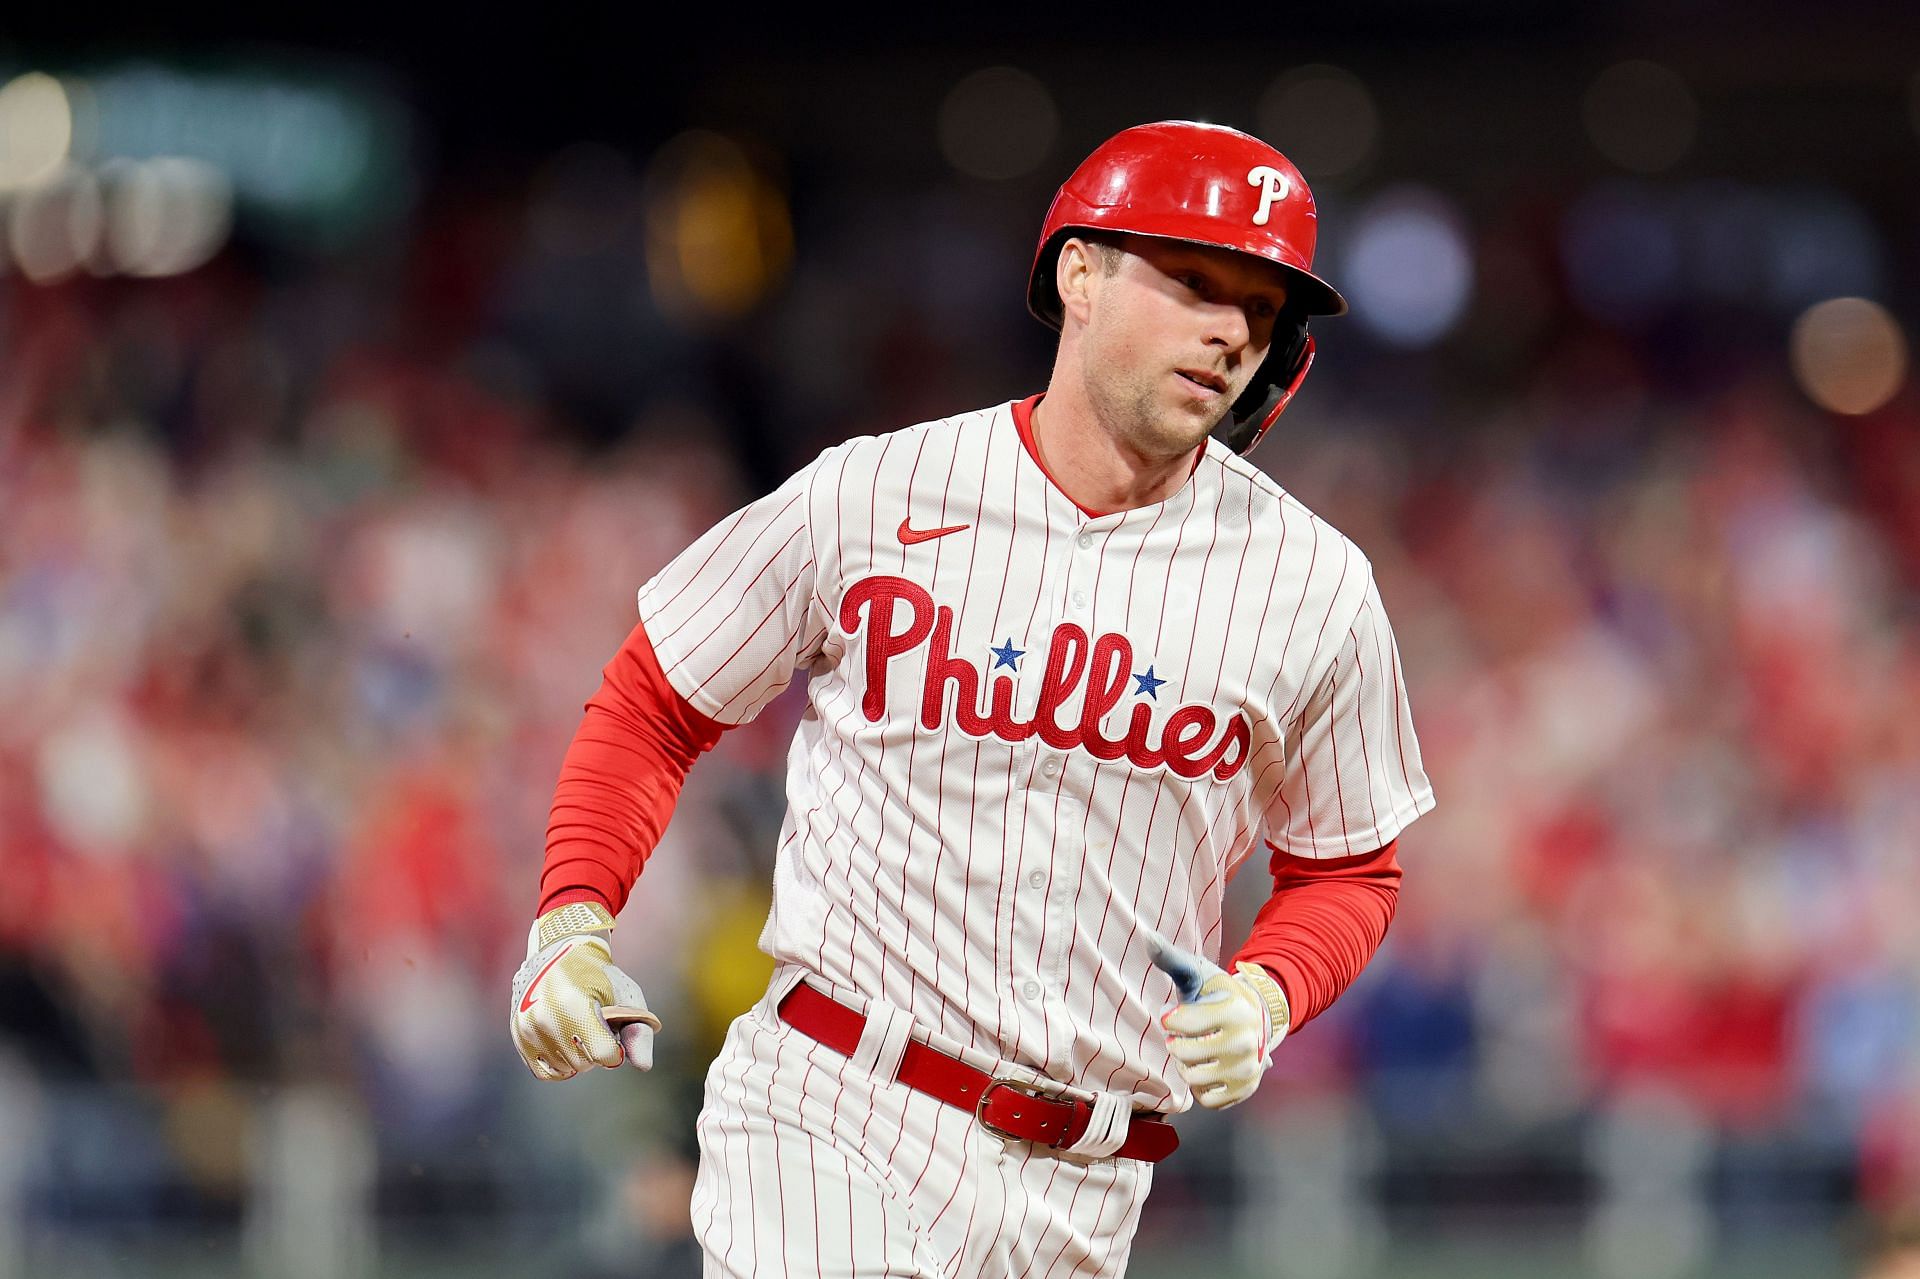 Rhys Hoskins carted off field following seemingly serious injury